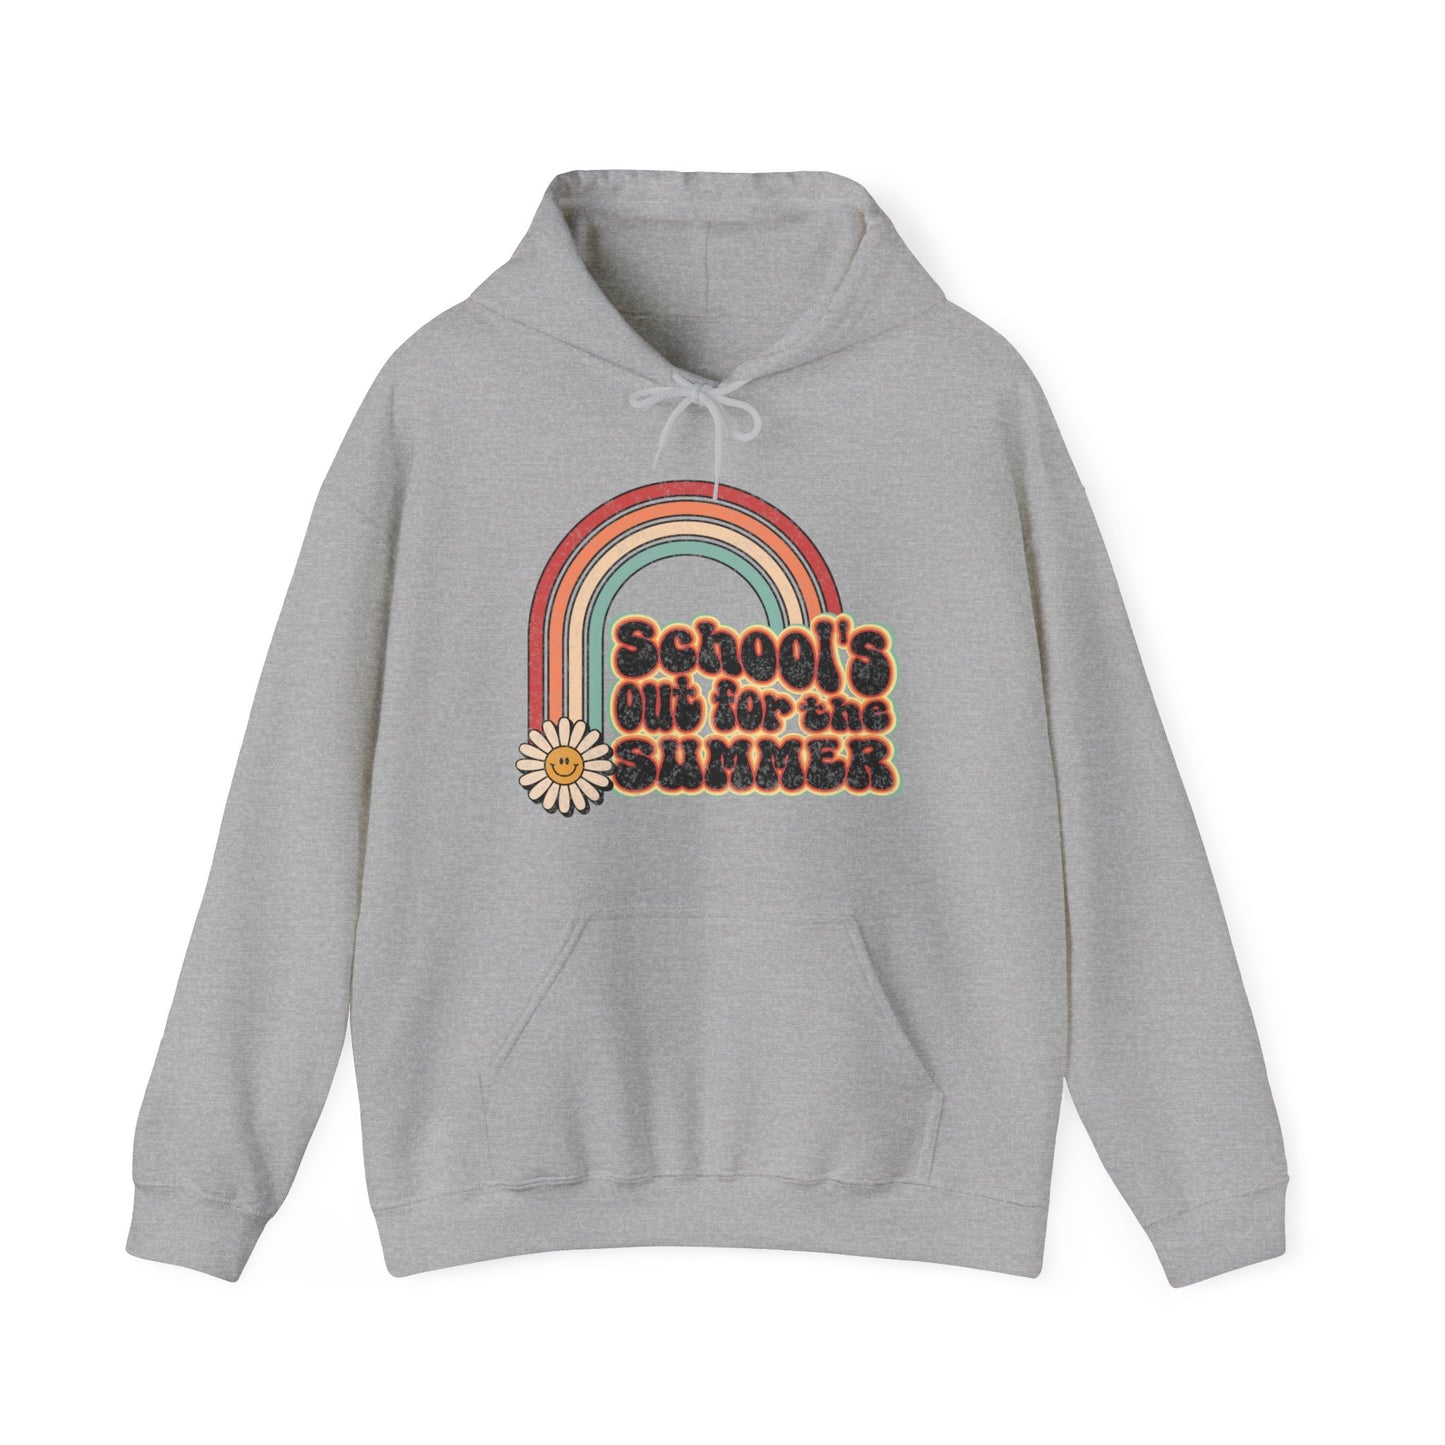 School’s out for the Summer - Unisex Heavy Blend™ Hooded Sweatshirt